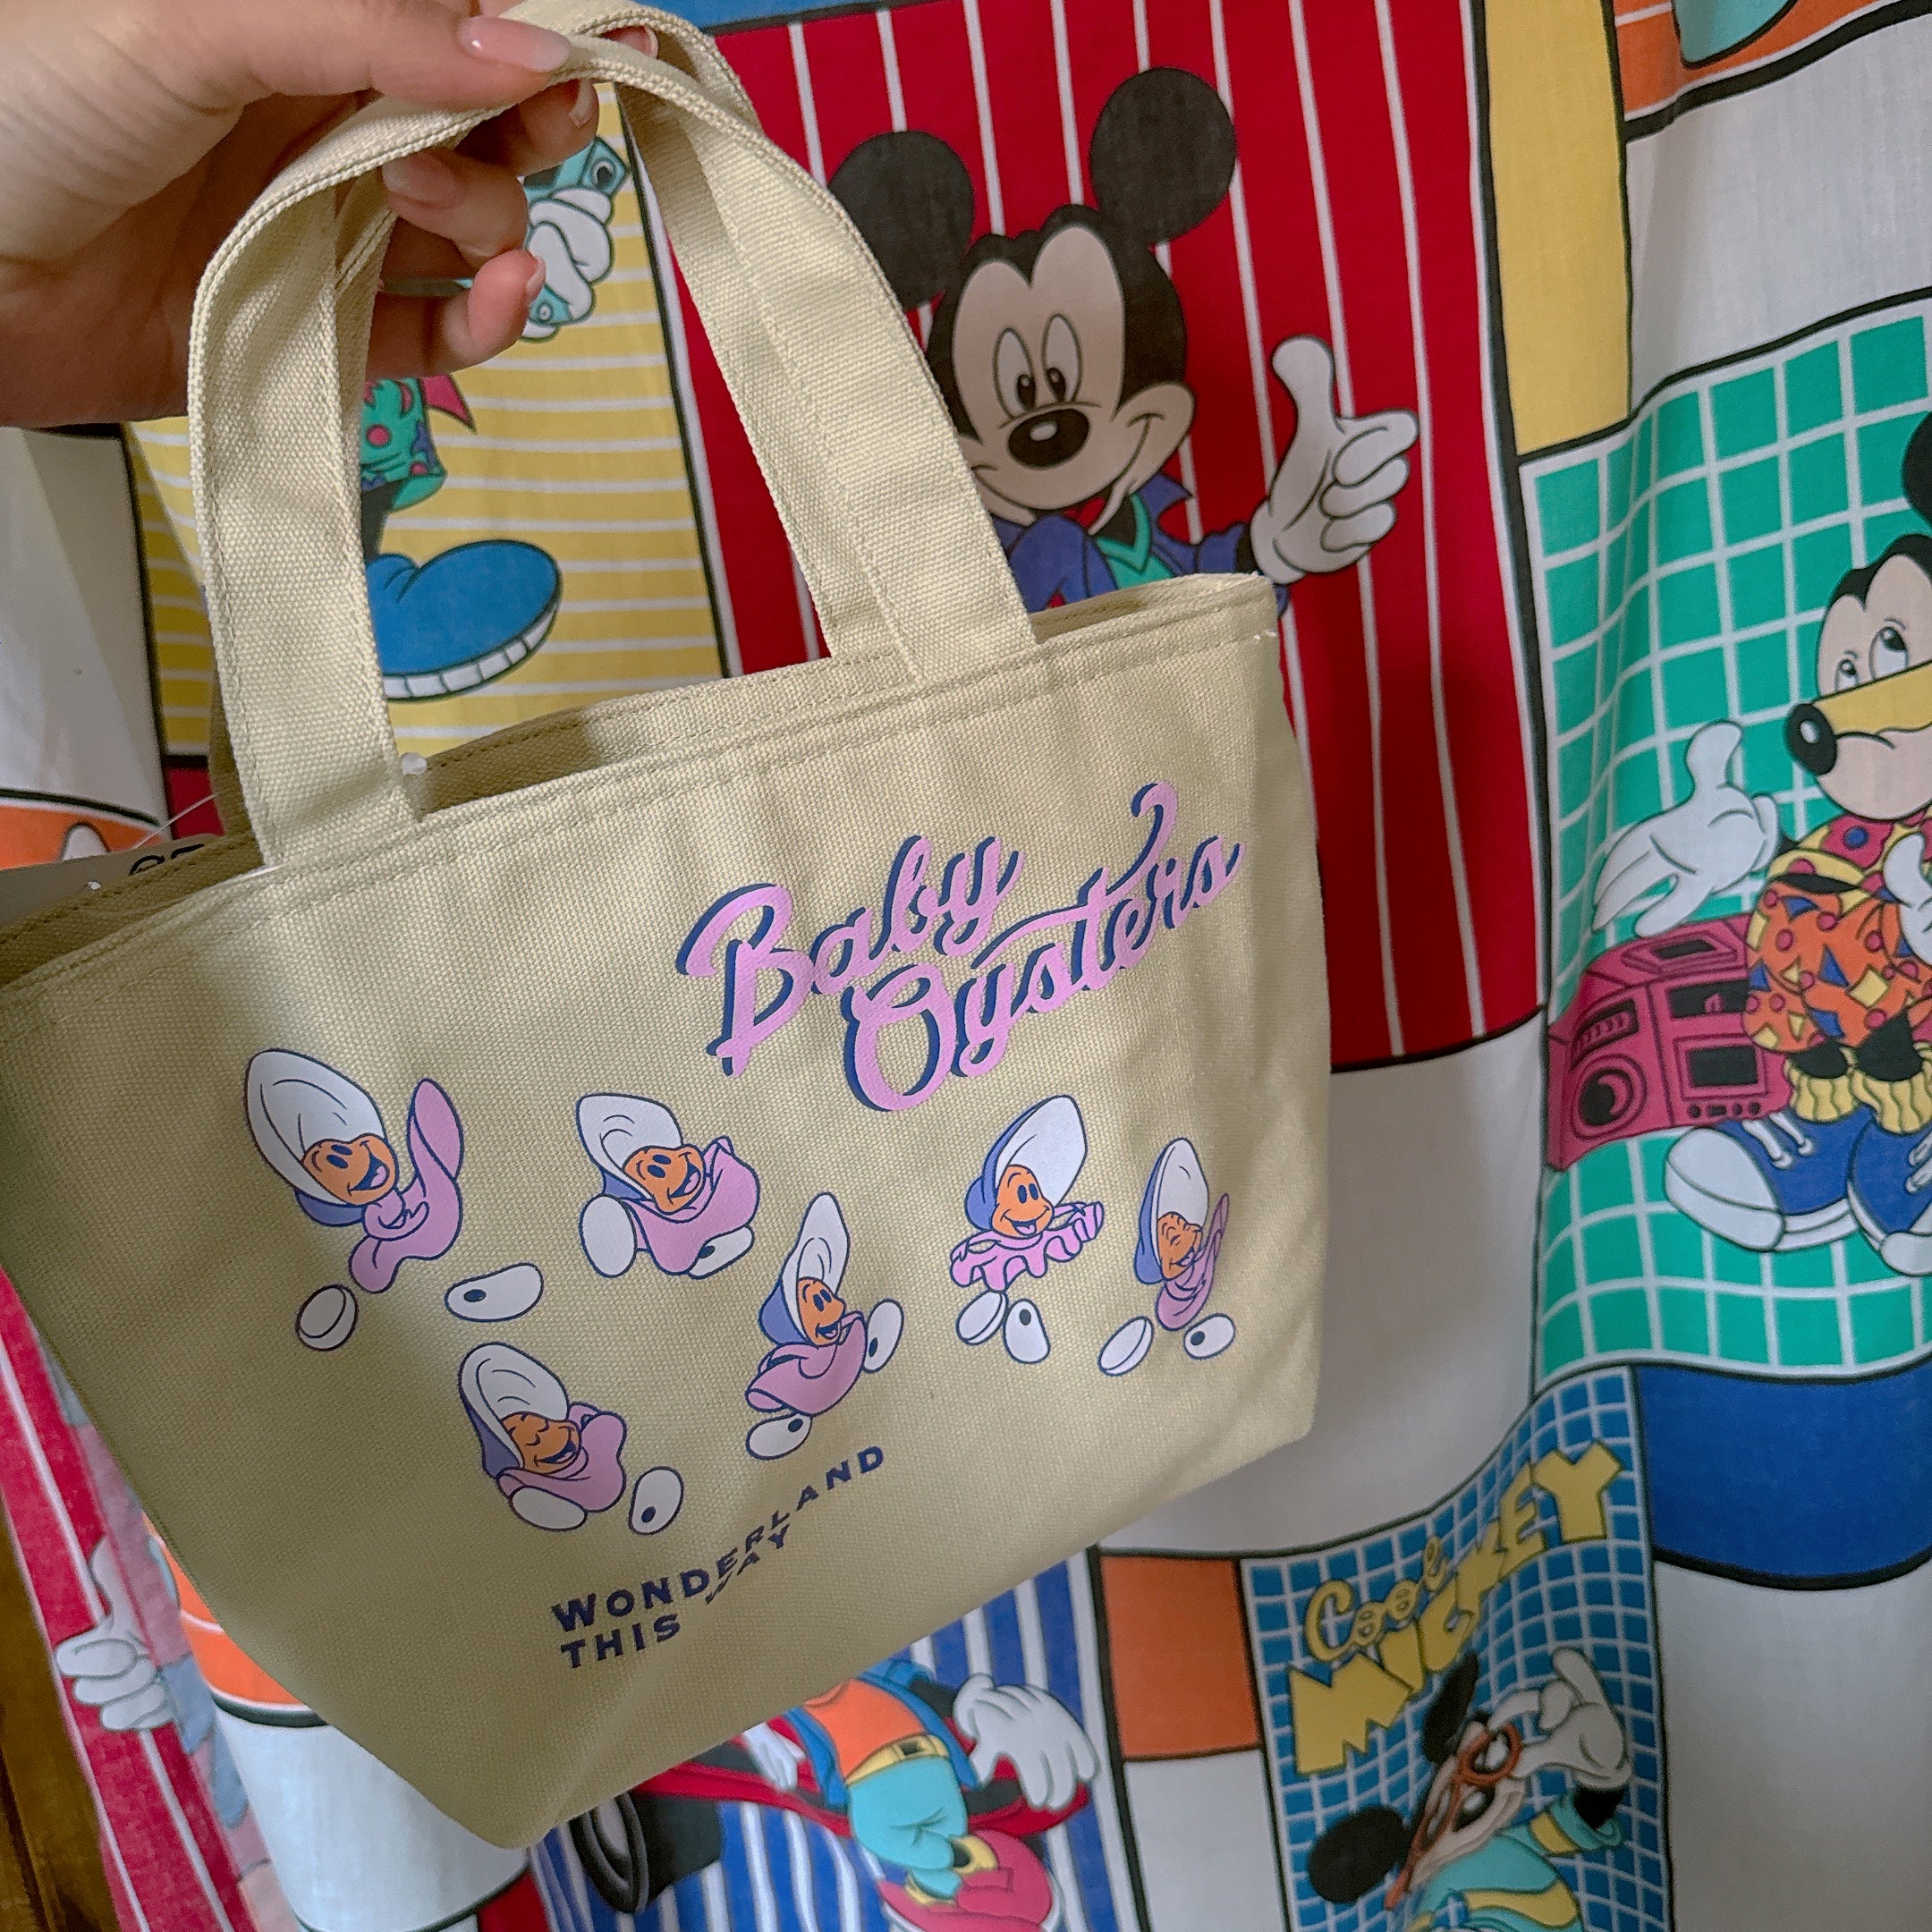 Pre-order: 5 types of Disney insulated lunch bags with zippers. Shipment scheduled for April 9th.